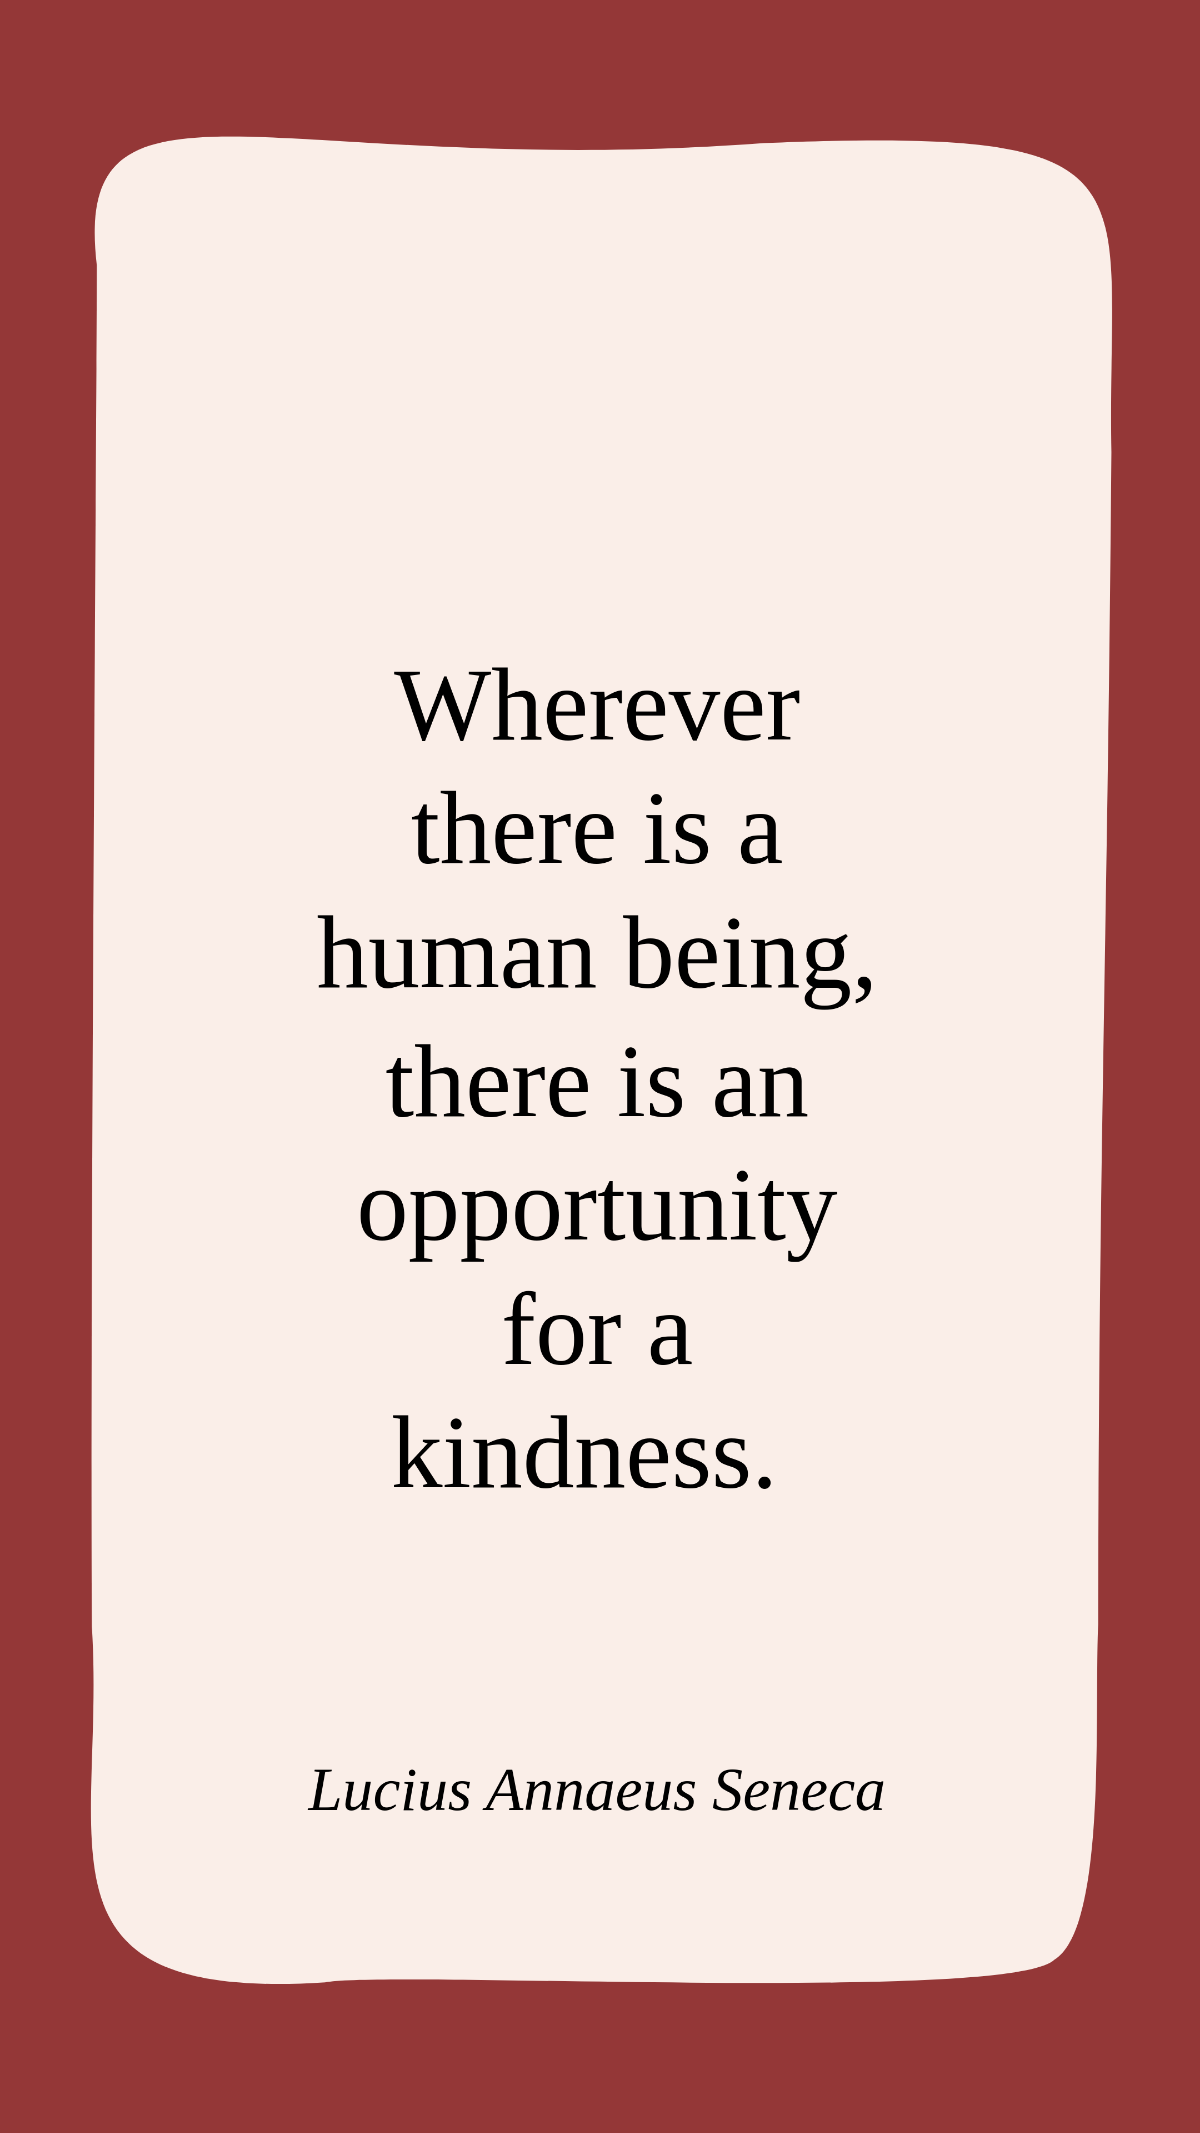 Free Lucius Annaeus Seneca - Wherever there is a human being, there is an opportunity for a kindness. Template